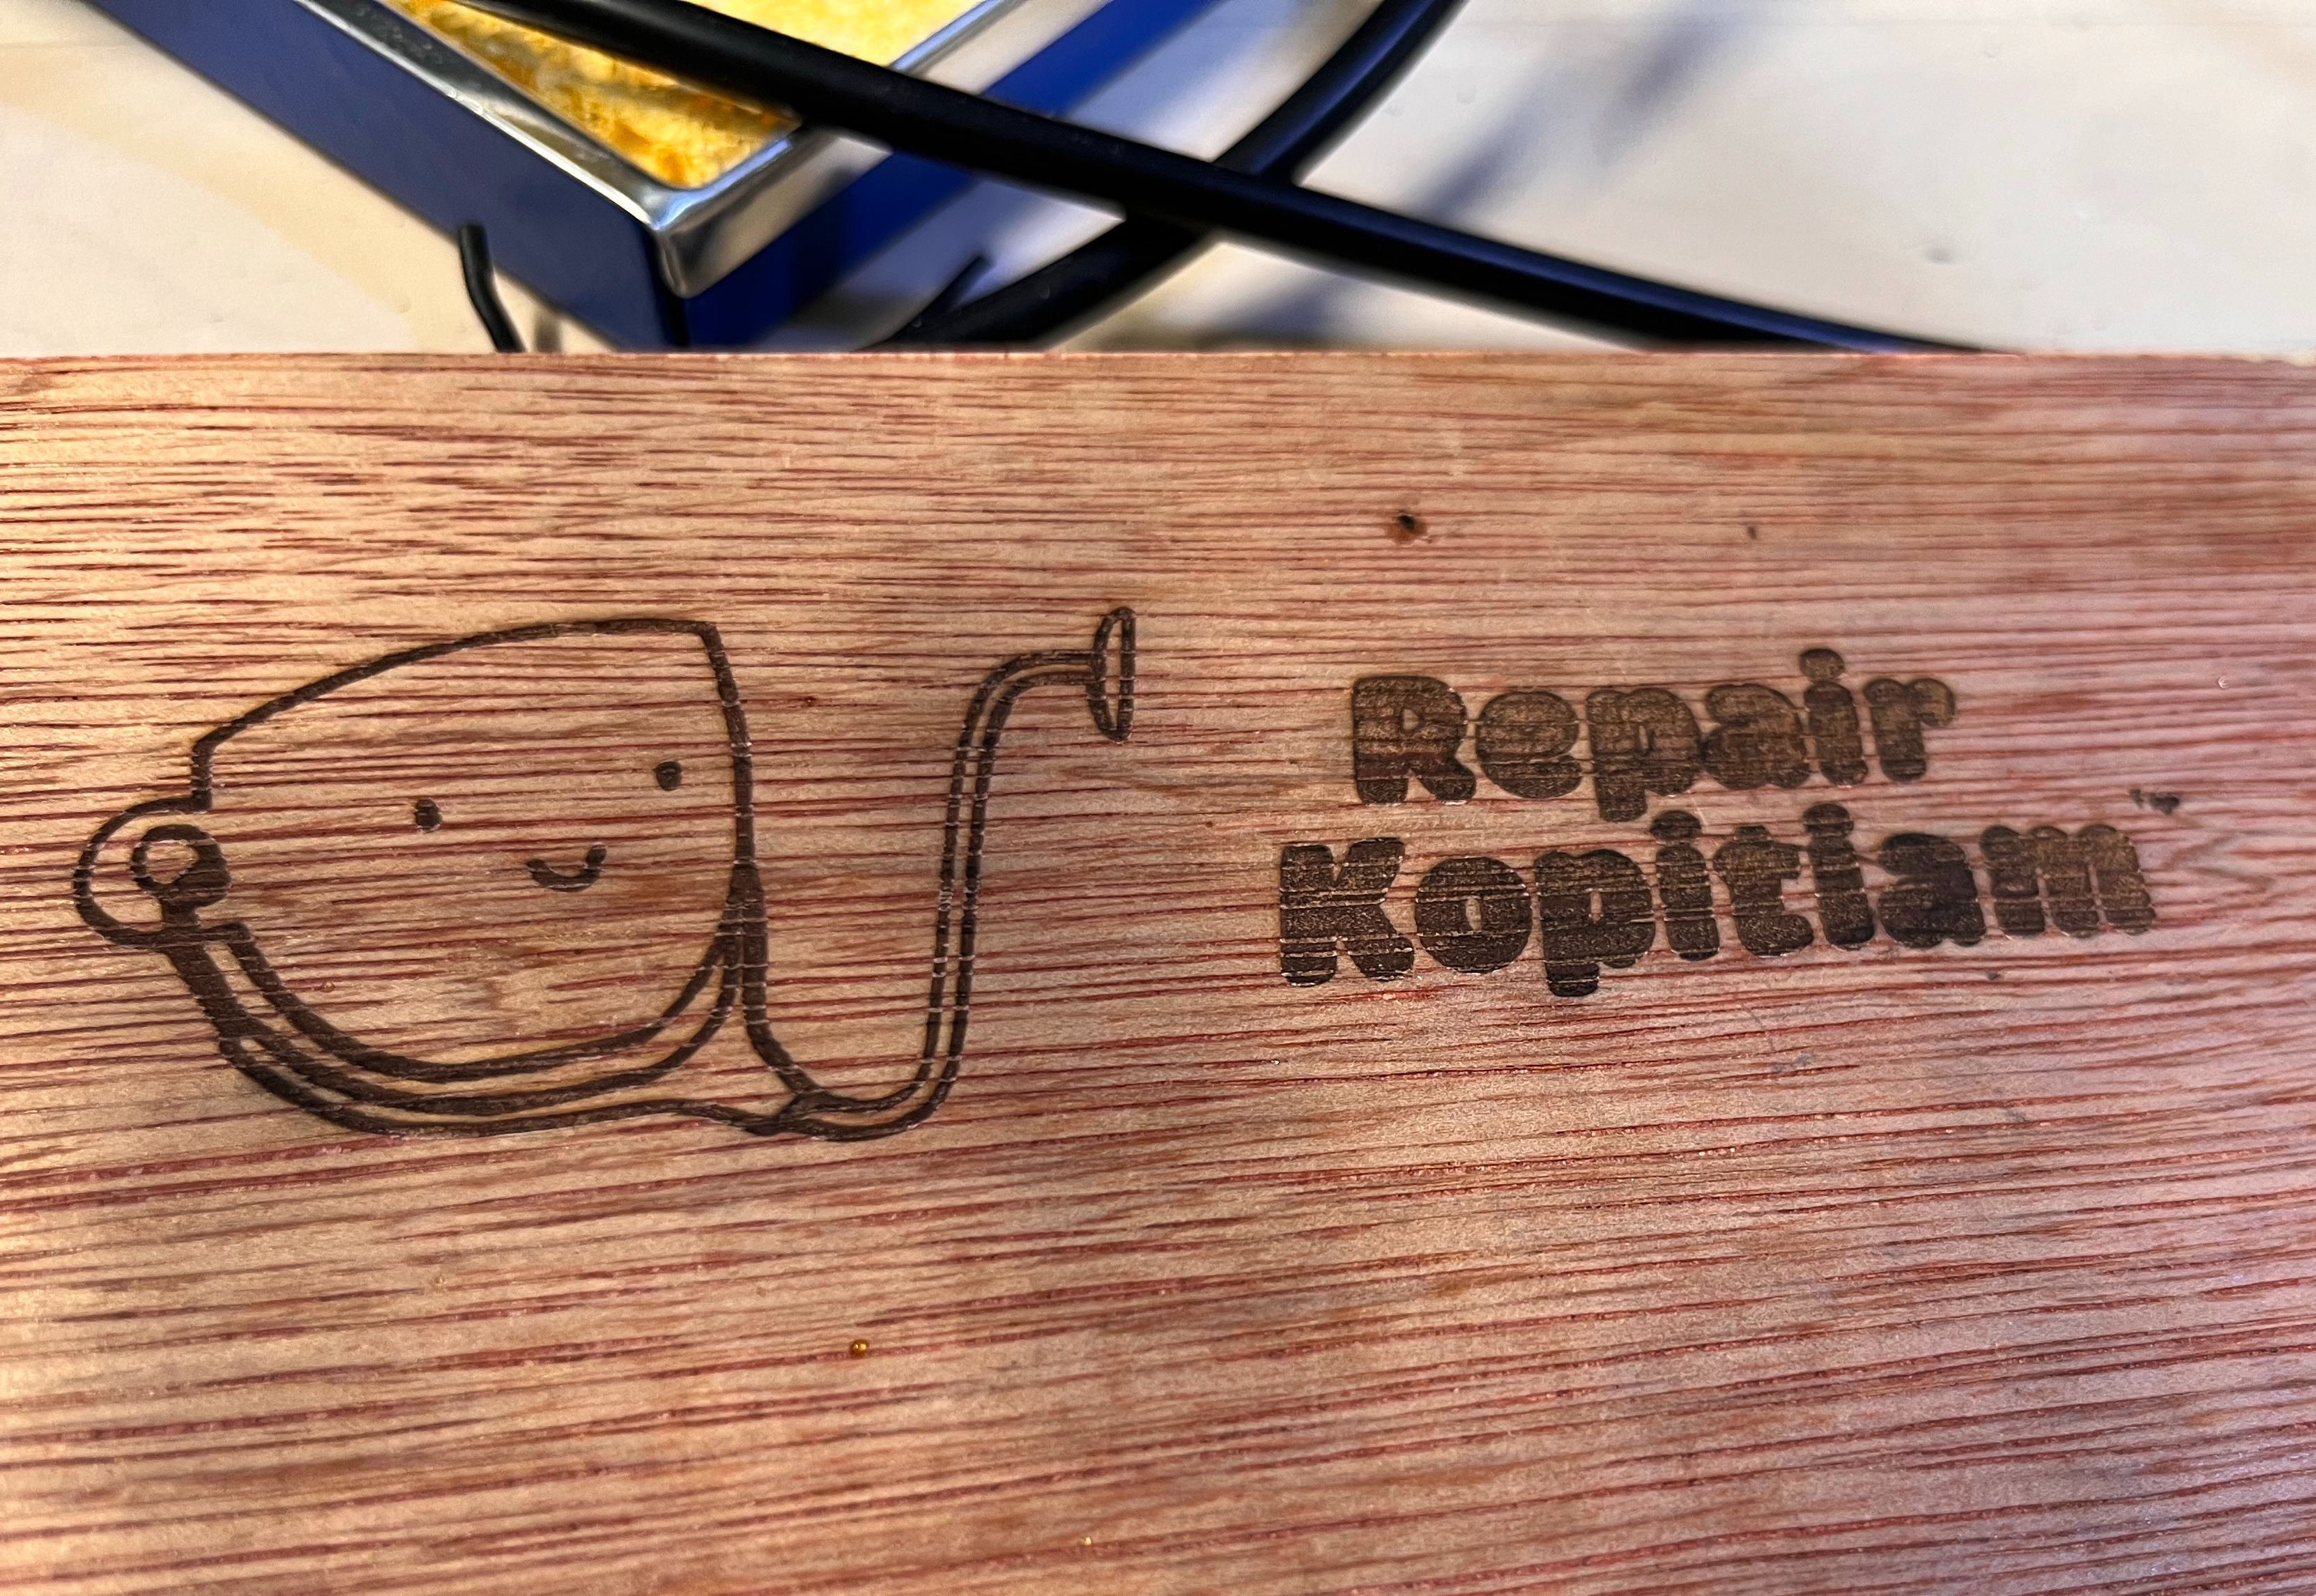 A wooden board with 'Repair Kopitiam' printed on it, and a coffee cup wearing a stethoscope